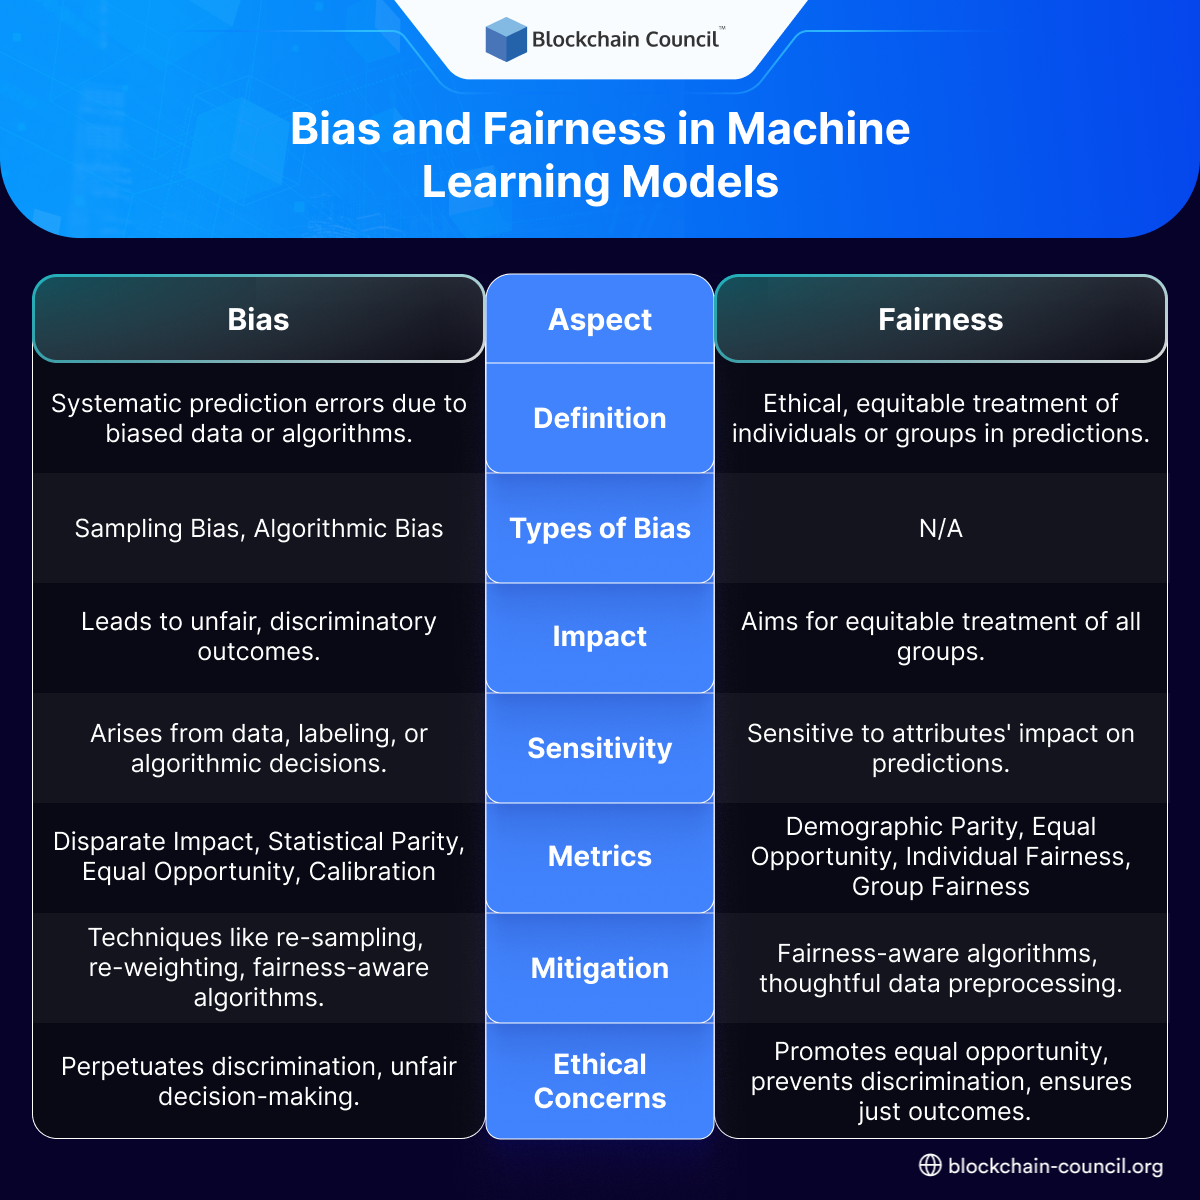 explain bias and fairness in machine learning models?